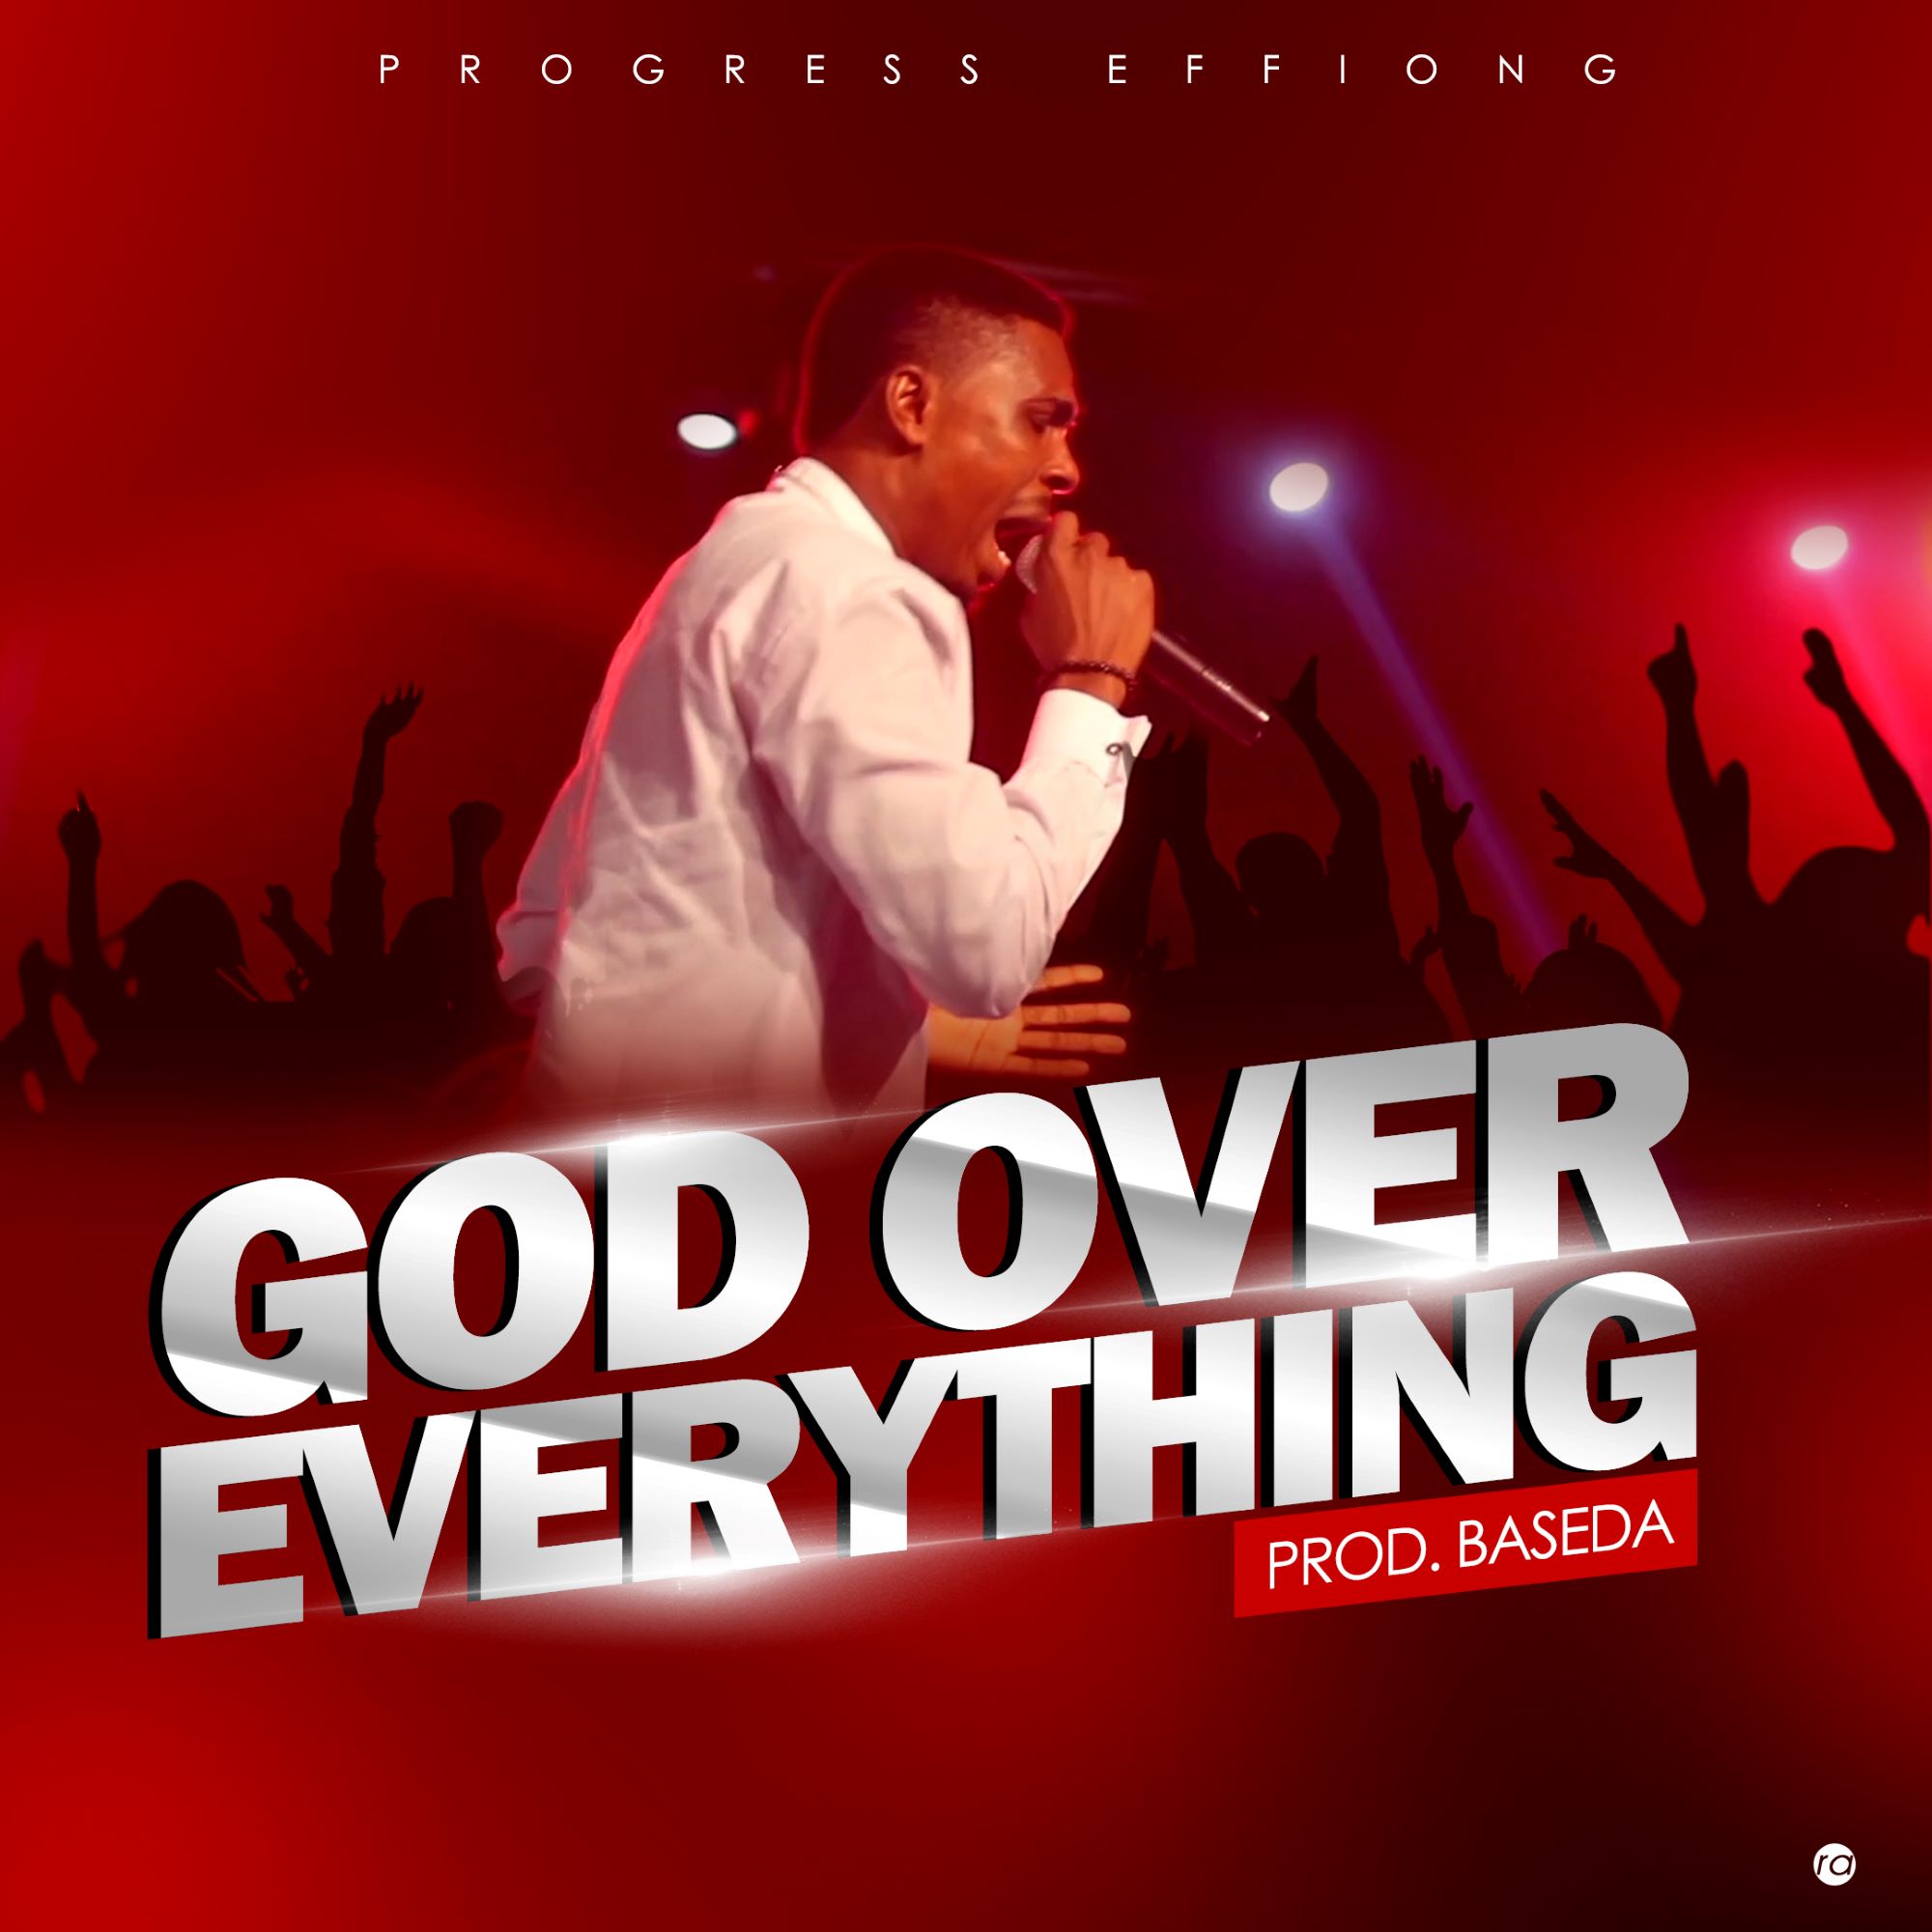 Progress Effiong - God Over Everything (Free Mp3 Download)